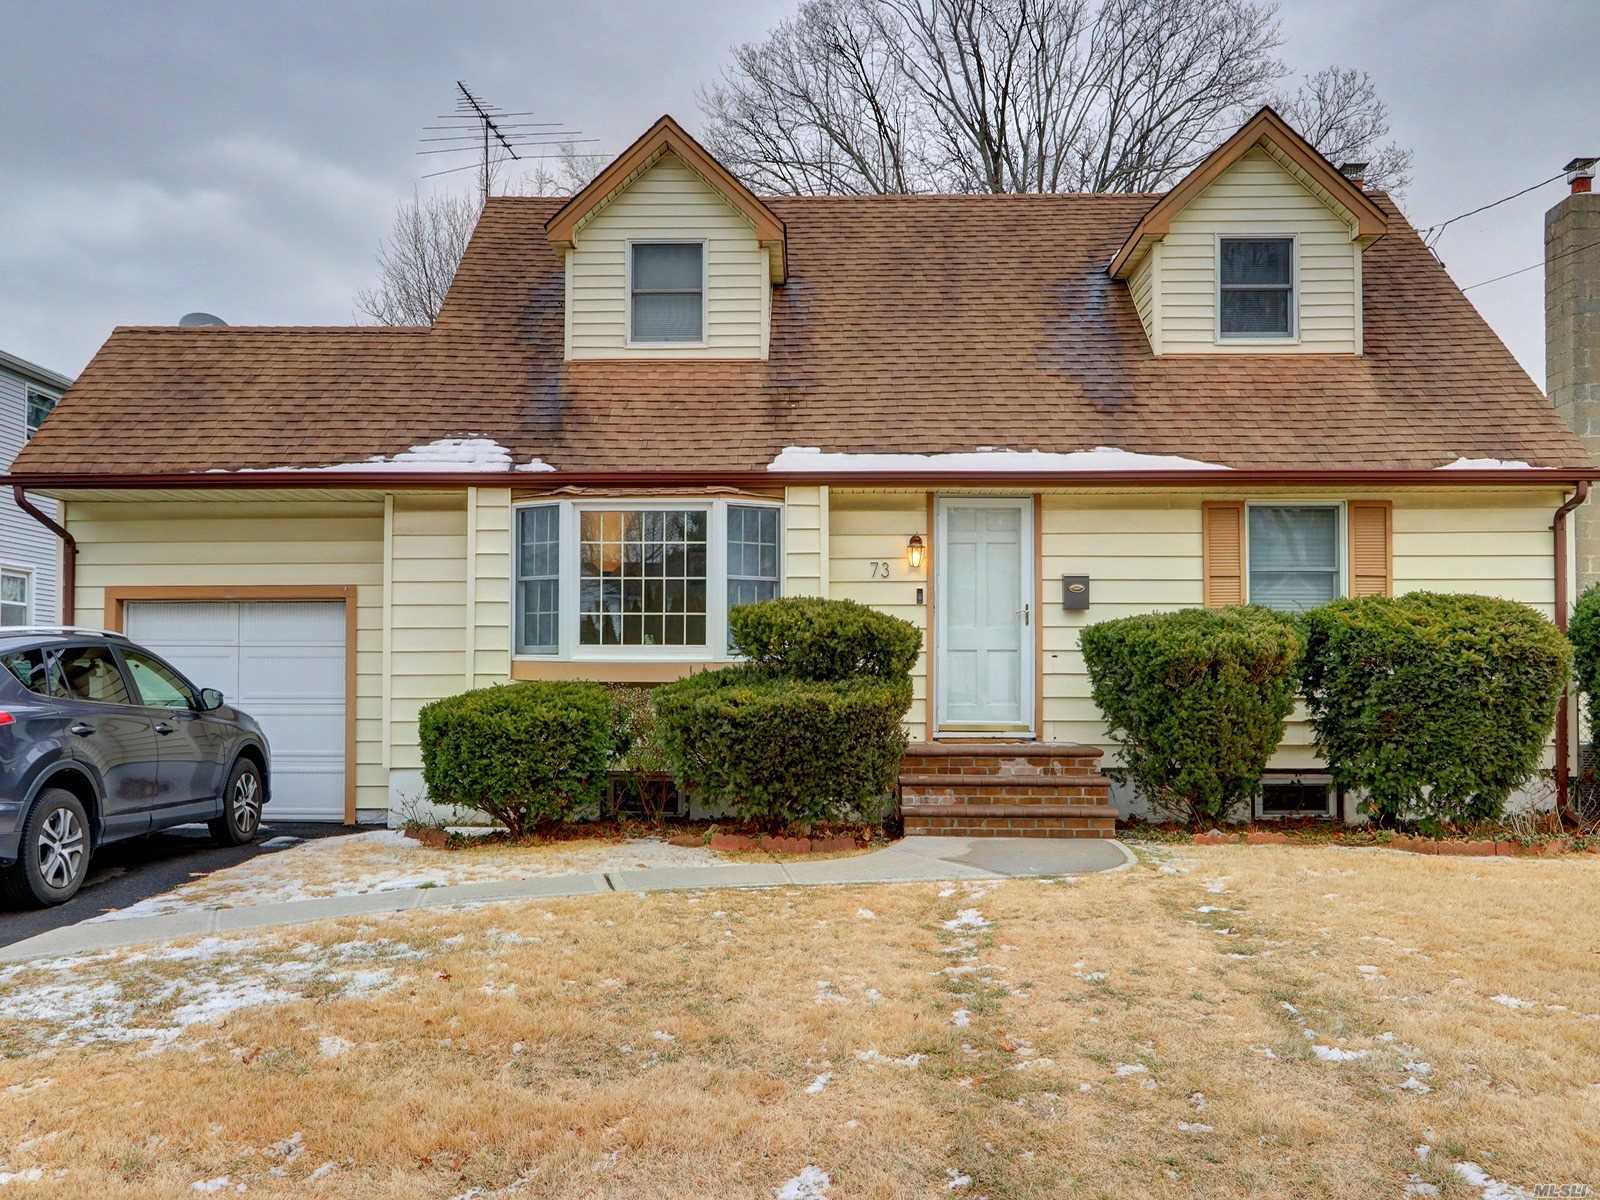 Charming Cape In Desirable Massapequa Park! 4 Bedrooms, 1 Bath, Living Room, Dining Room, Kitchen, Beautiful Hardwood Floors Throughout! Full Basement, Private Yard, Quiet Street, Close To All! Don&rsquo;t Miss Out On This Wonderful Home!